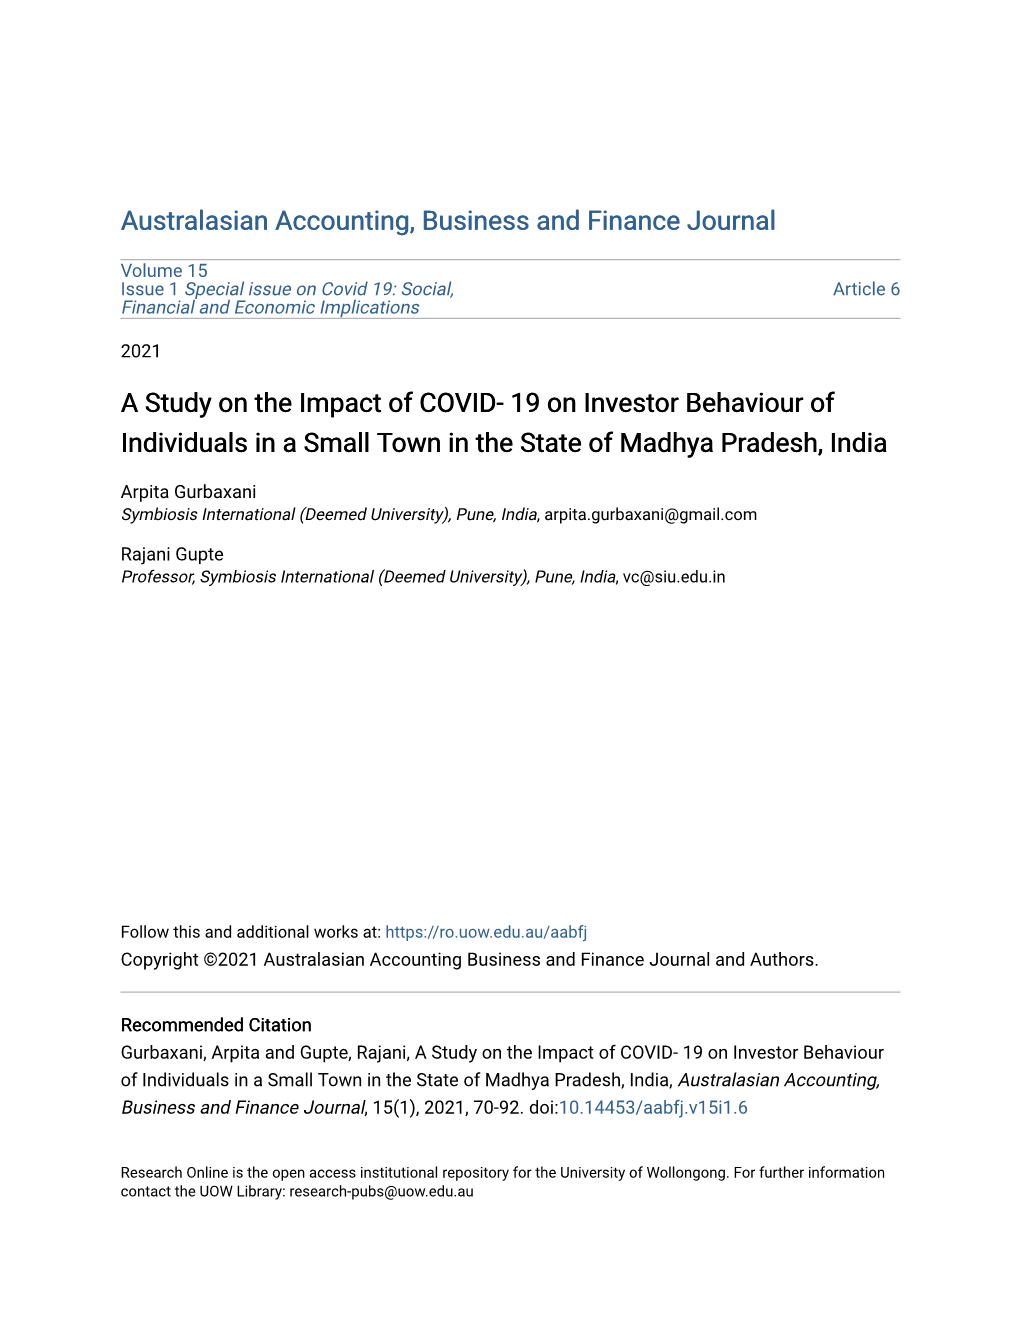 A Study on the Impact of COVID- 19 on Investor Behaviour of Individuals in a Small Town in the State of Madhya Pradesh, India